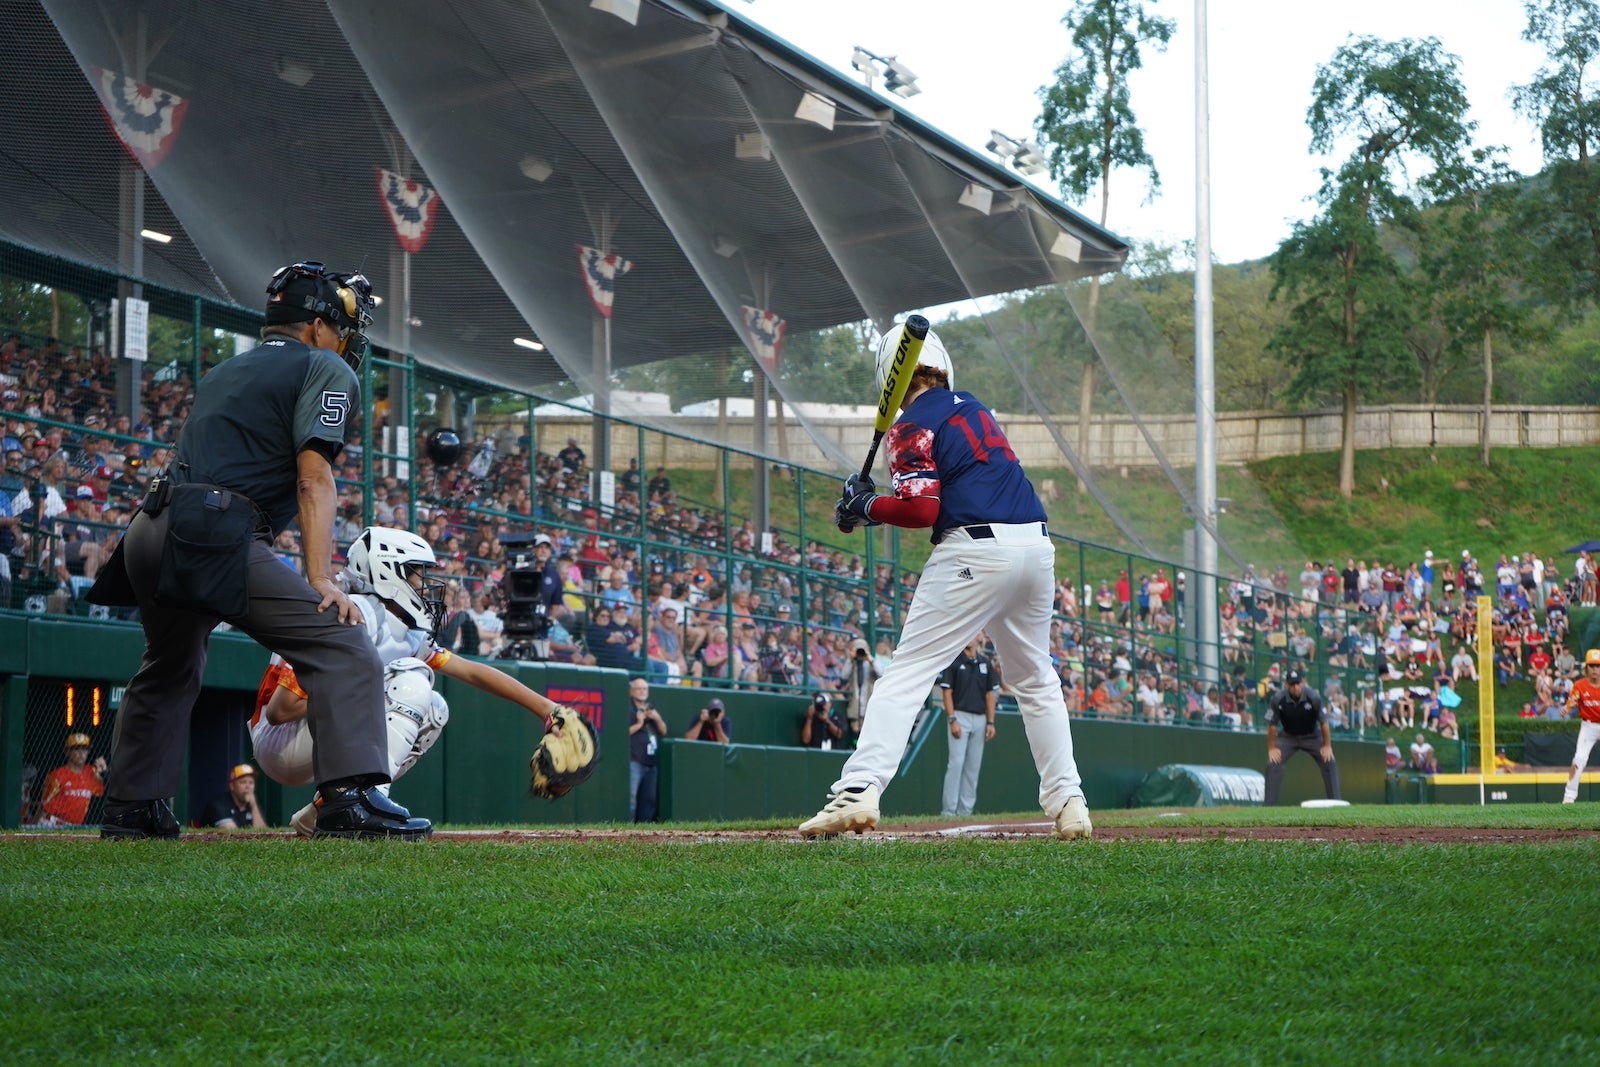 Little League World Series cancellation: What will the economic